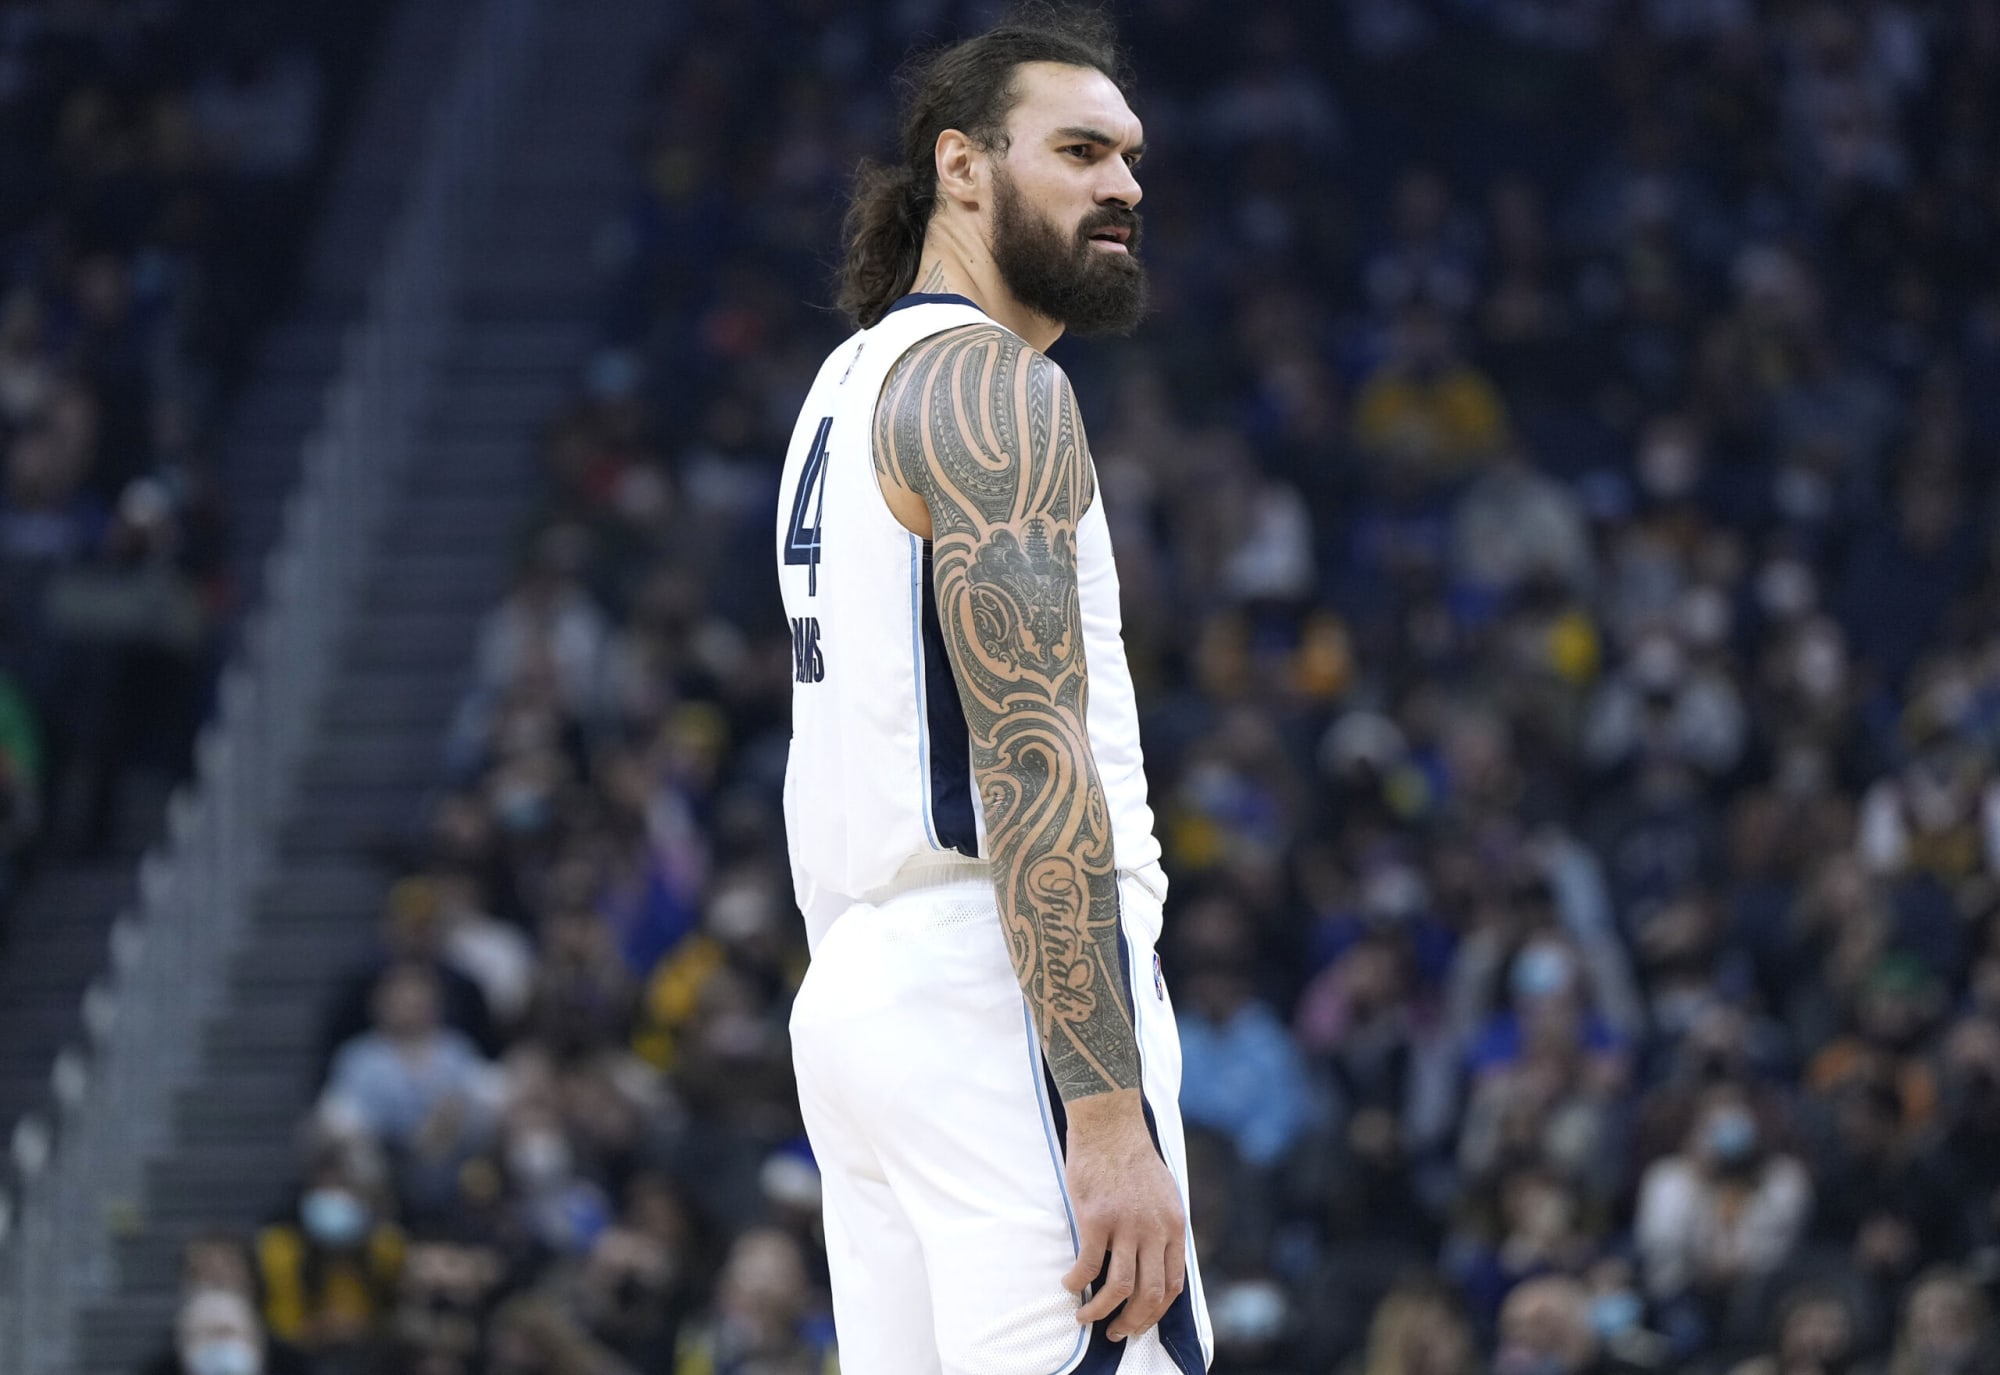 Grizzlies center Steven Adams out for season due to right knee surgery